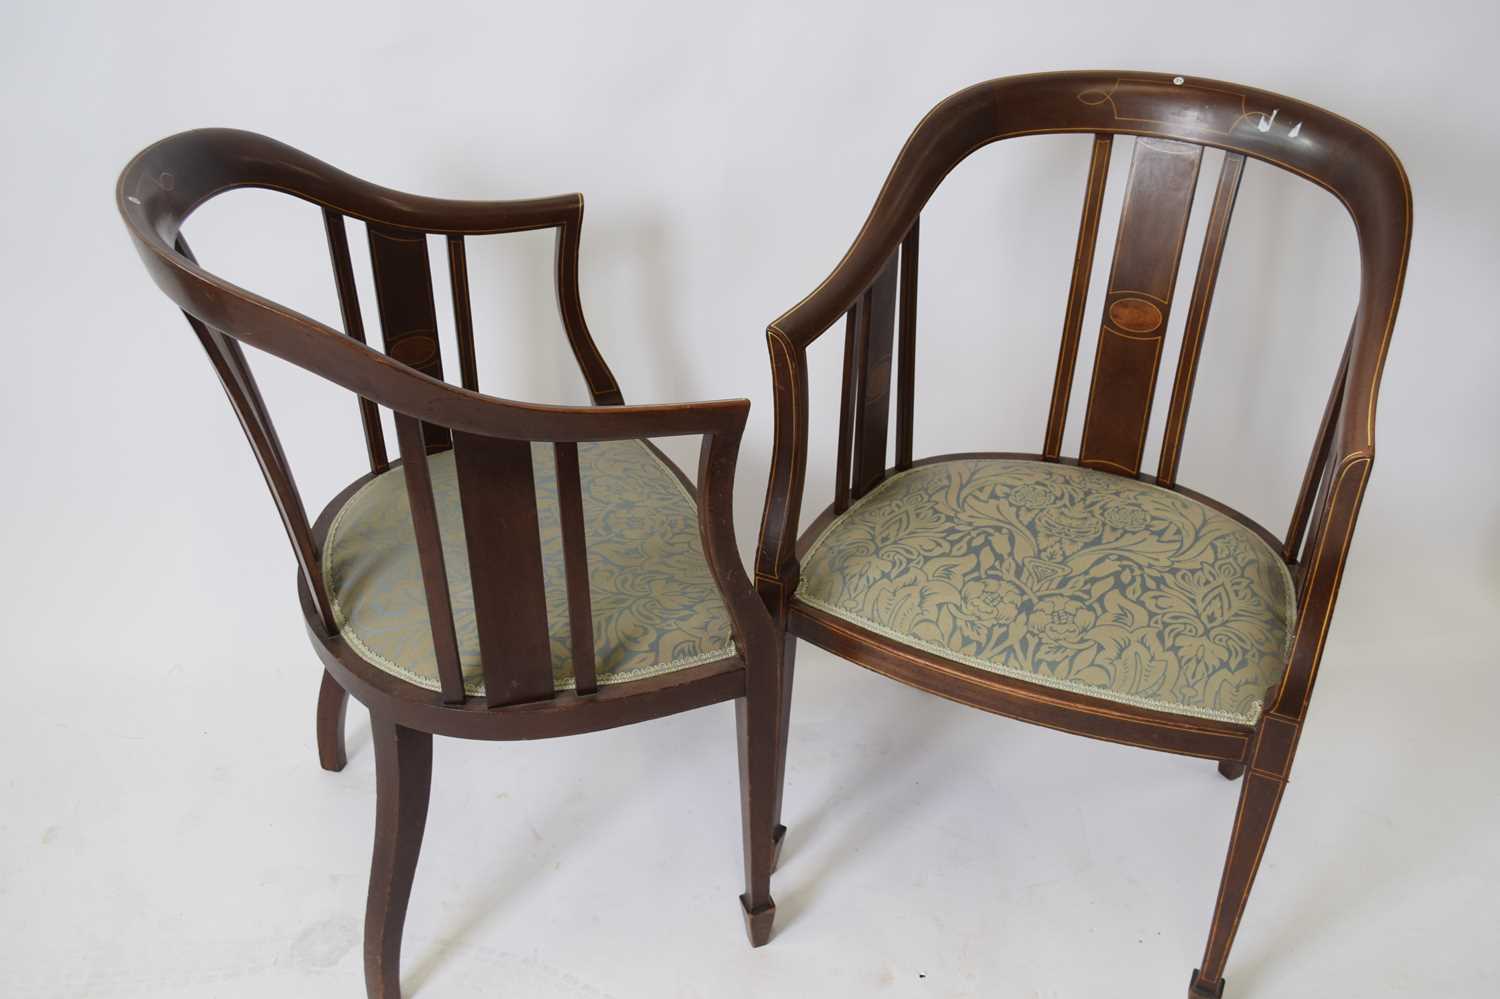 Pair of Edwardian mahogany framed bow back side chairs with blue floral upholstered seats, set on - Image 2 of 3